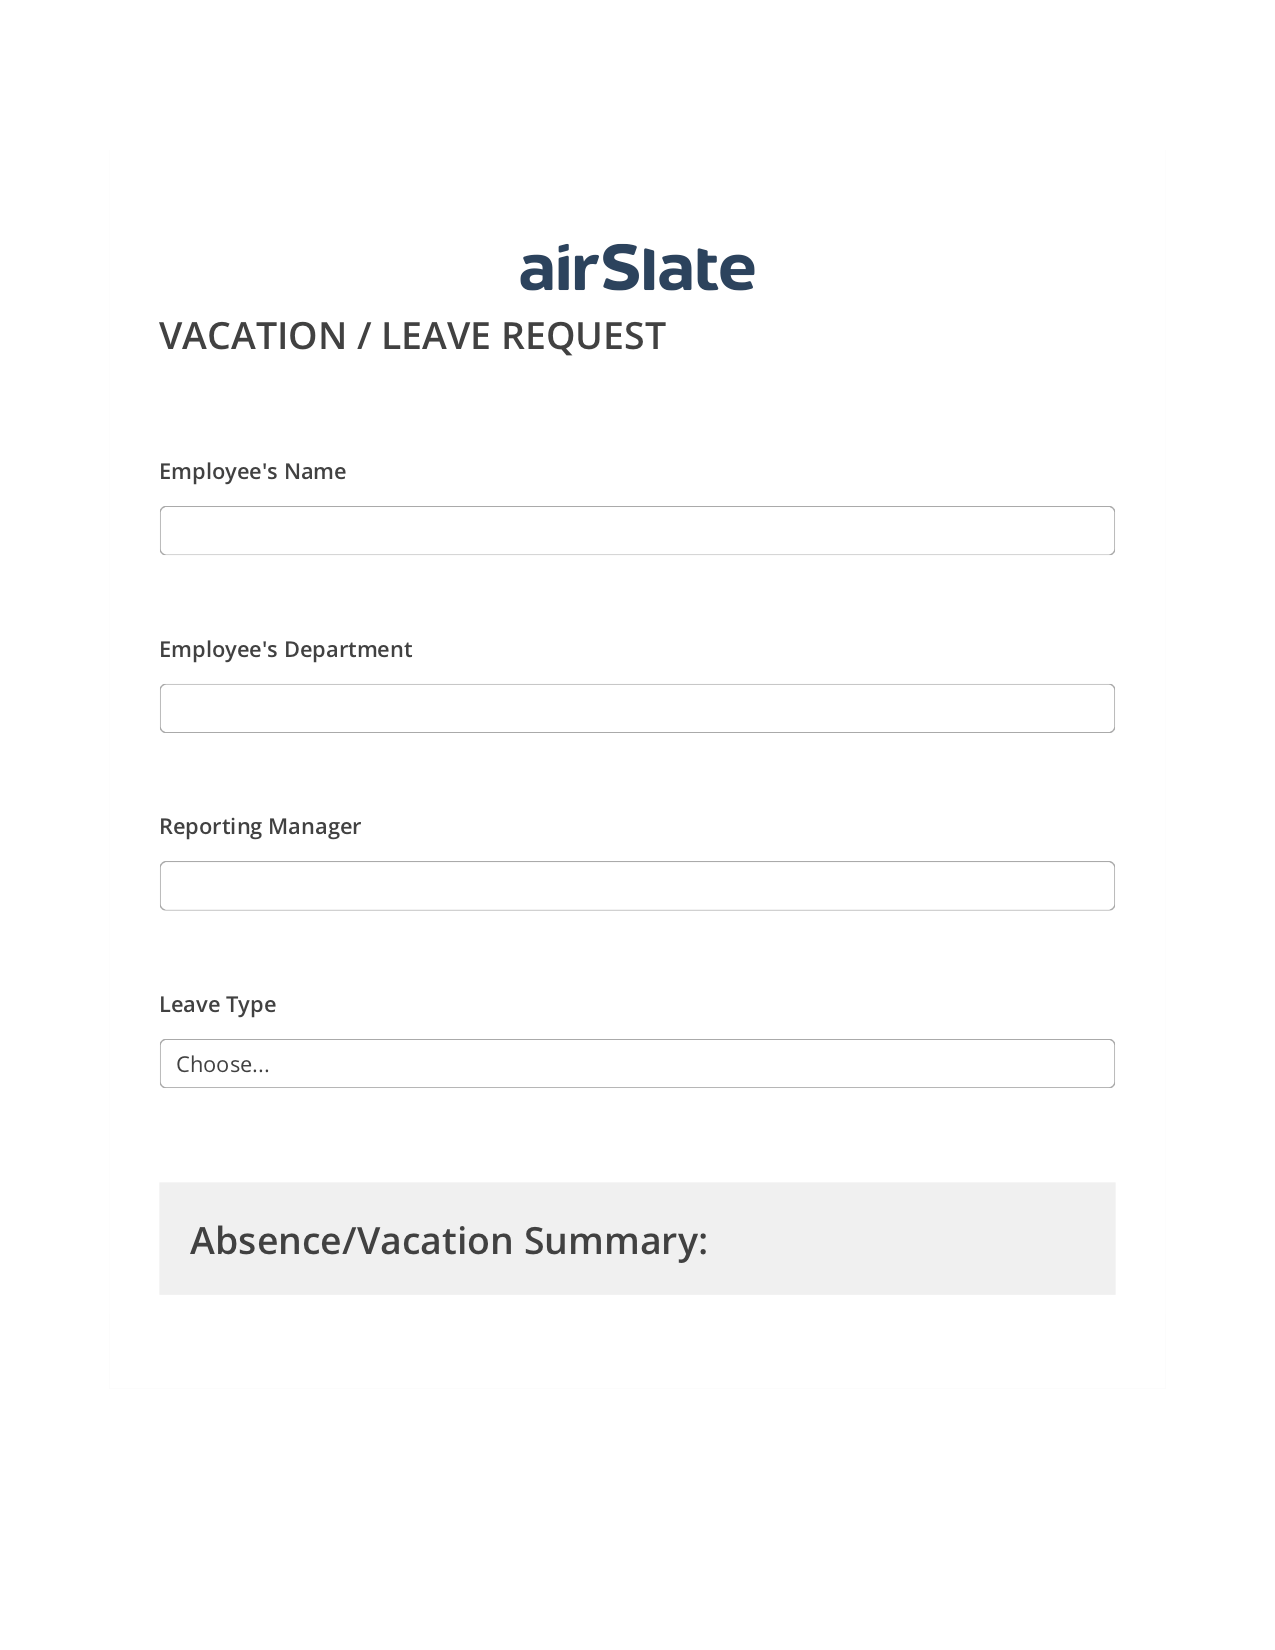 Vacation/Leave Request Workflow Pre-fill Dropdowns from Airtable, Add Tags to Slate Bot, Archive to Dropbox Bot